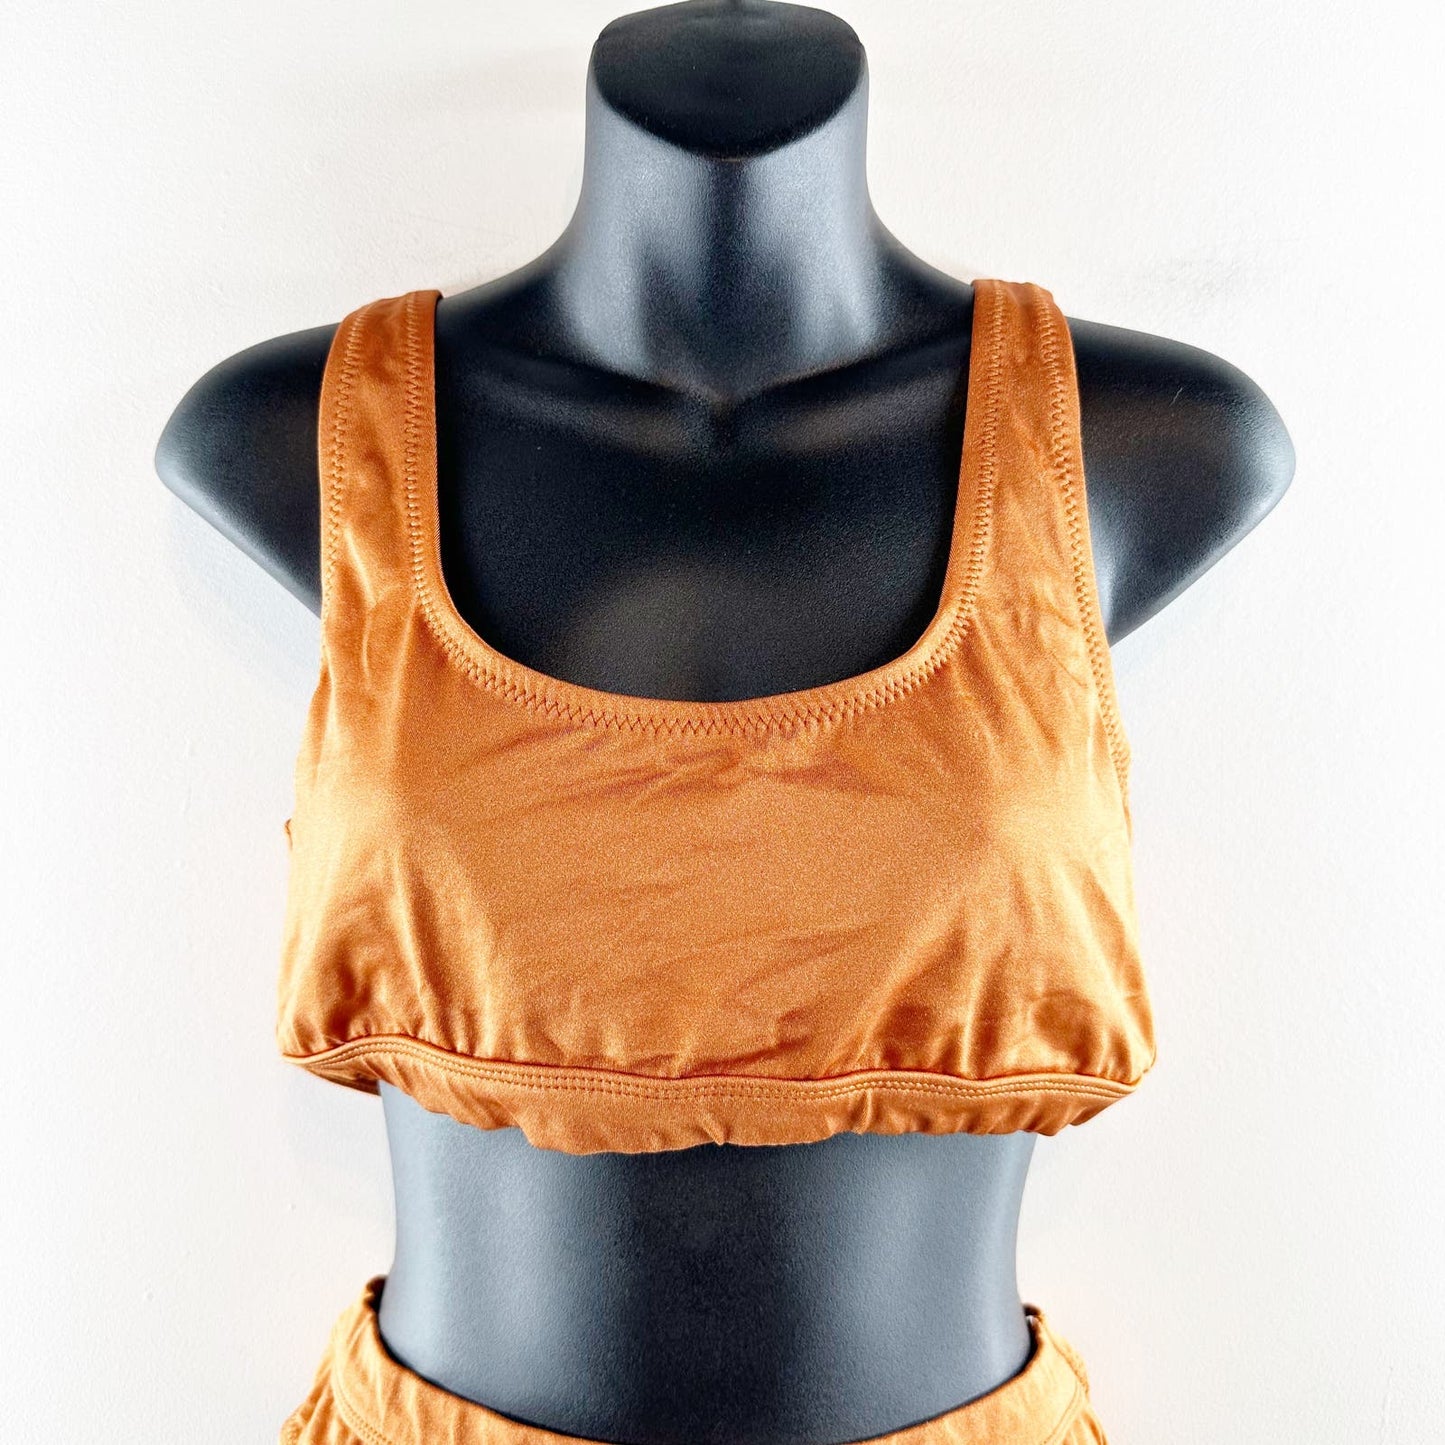 Dixperfect High Waisted Scoopneck Two Piece Bikini Bathing Suit Golden Copper XL